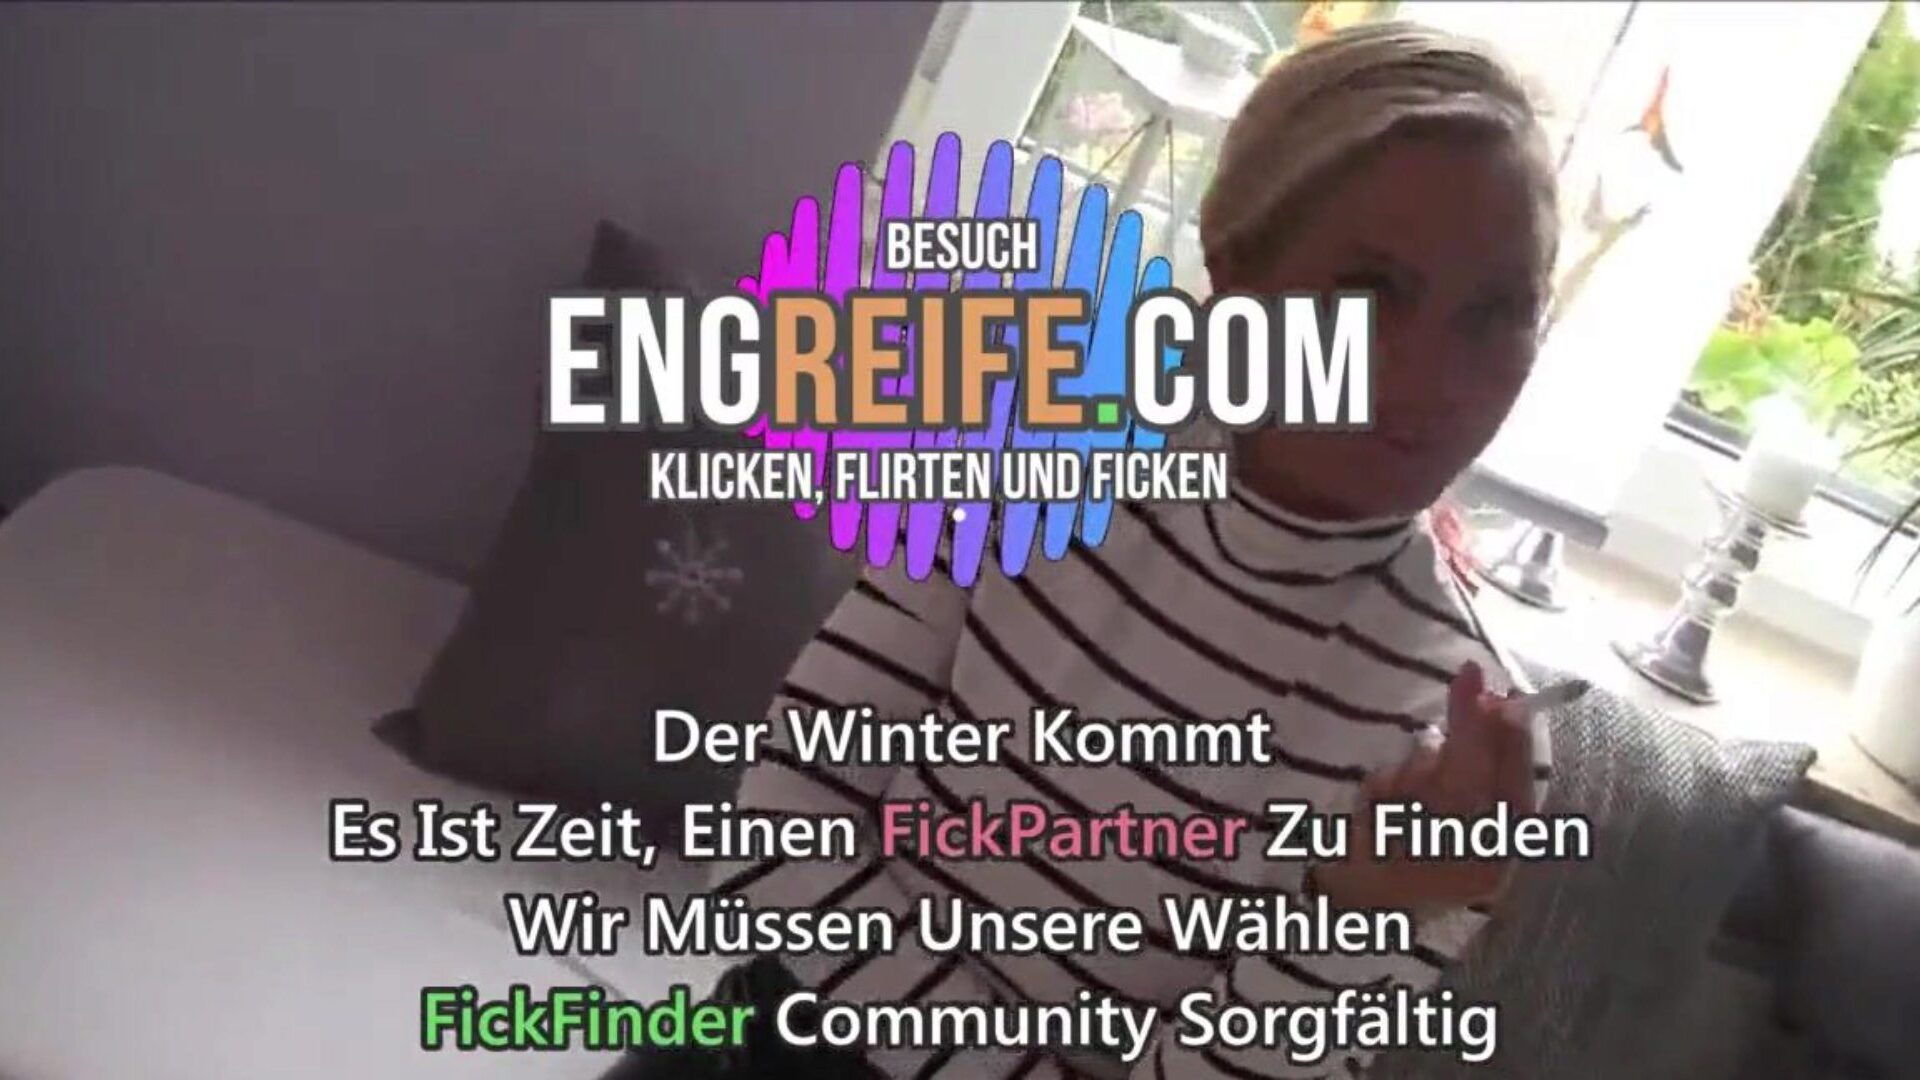 sperma vom jungen mann ist gesund fur mother i would like to fuck free hd porn 99 watch sperma vom jungen mann ist gesund blan mamă i would like to fuck clip on xhamster - the ultimate collection of free german utube free hd hardcore porno tube videos